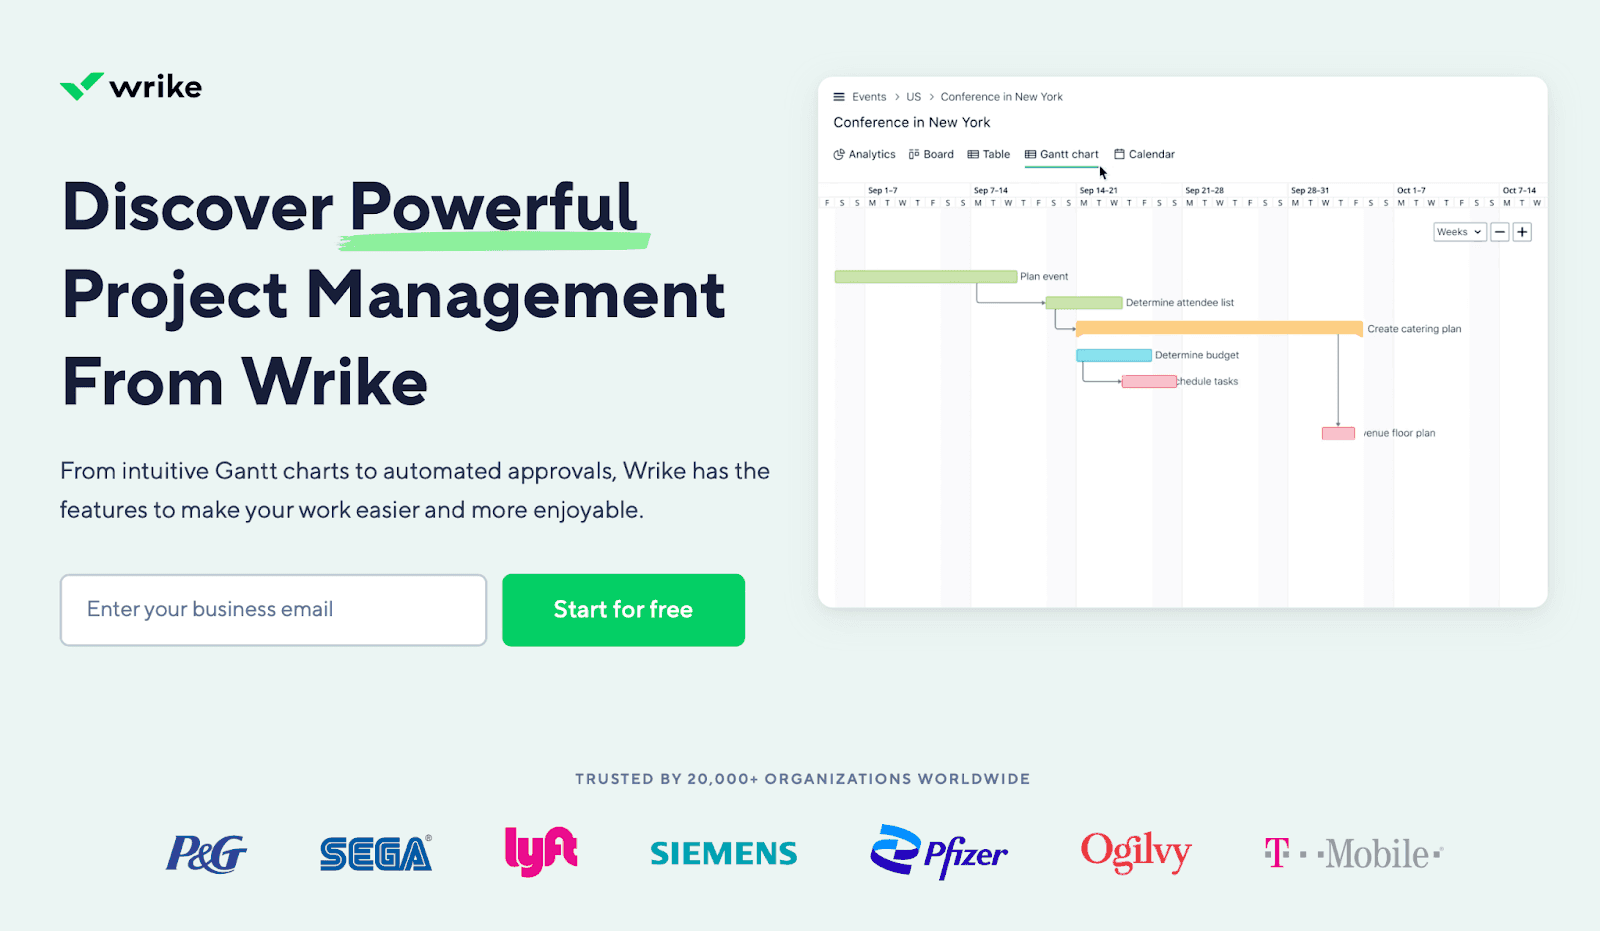 Wrike website - discover powerful project management from Wrike